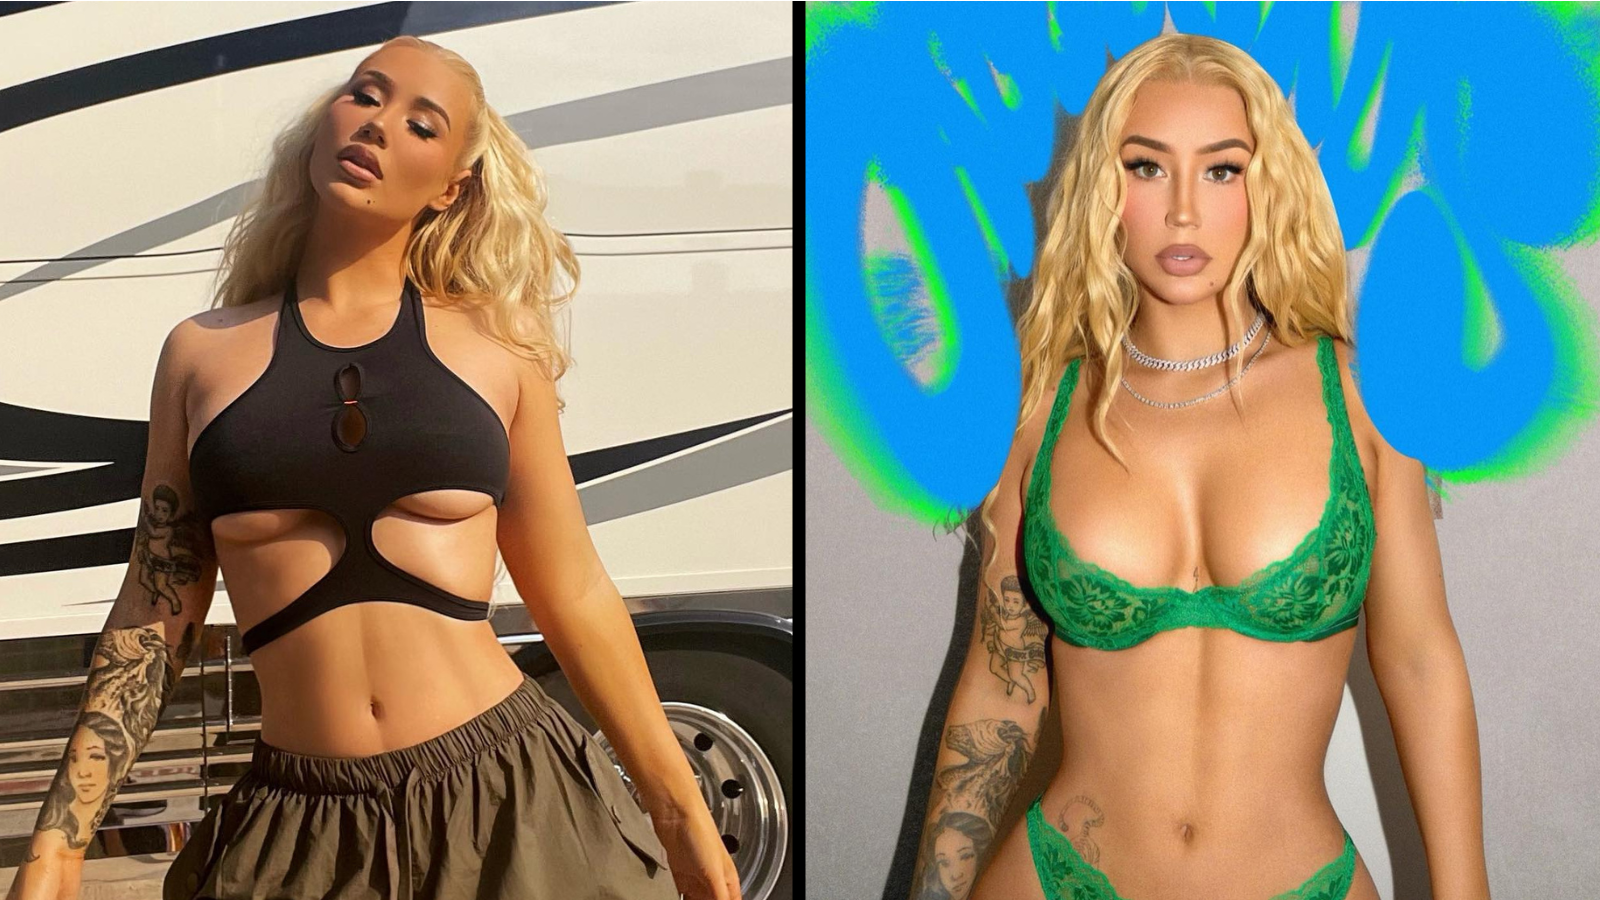 Porn Iggy Azalea Pussy - Iggy Azalea claims she is making 'so much money' from her OnlyFans